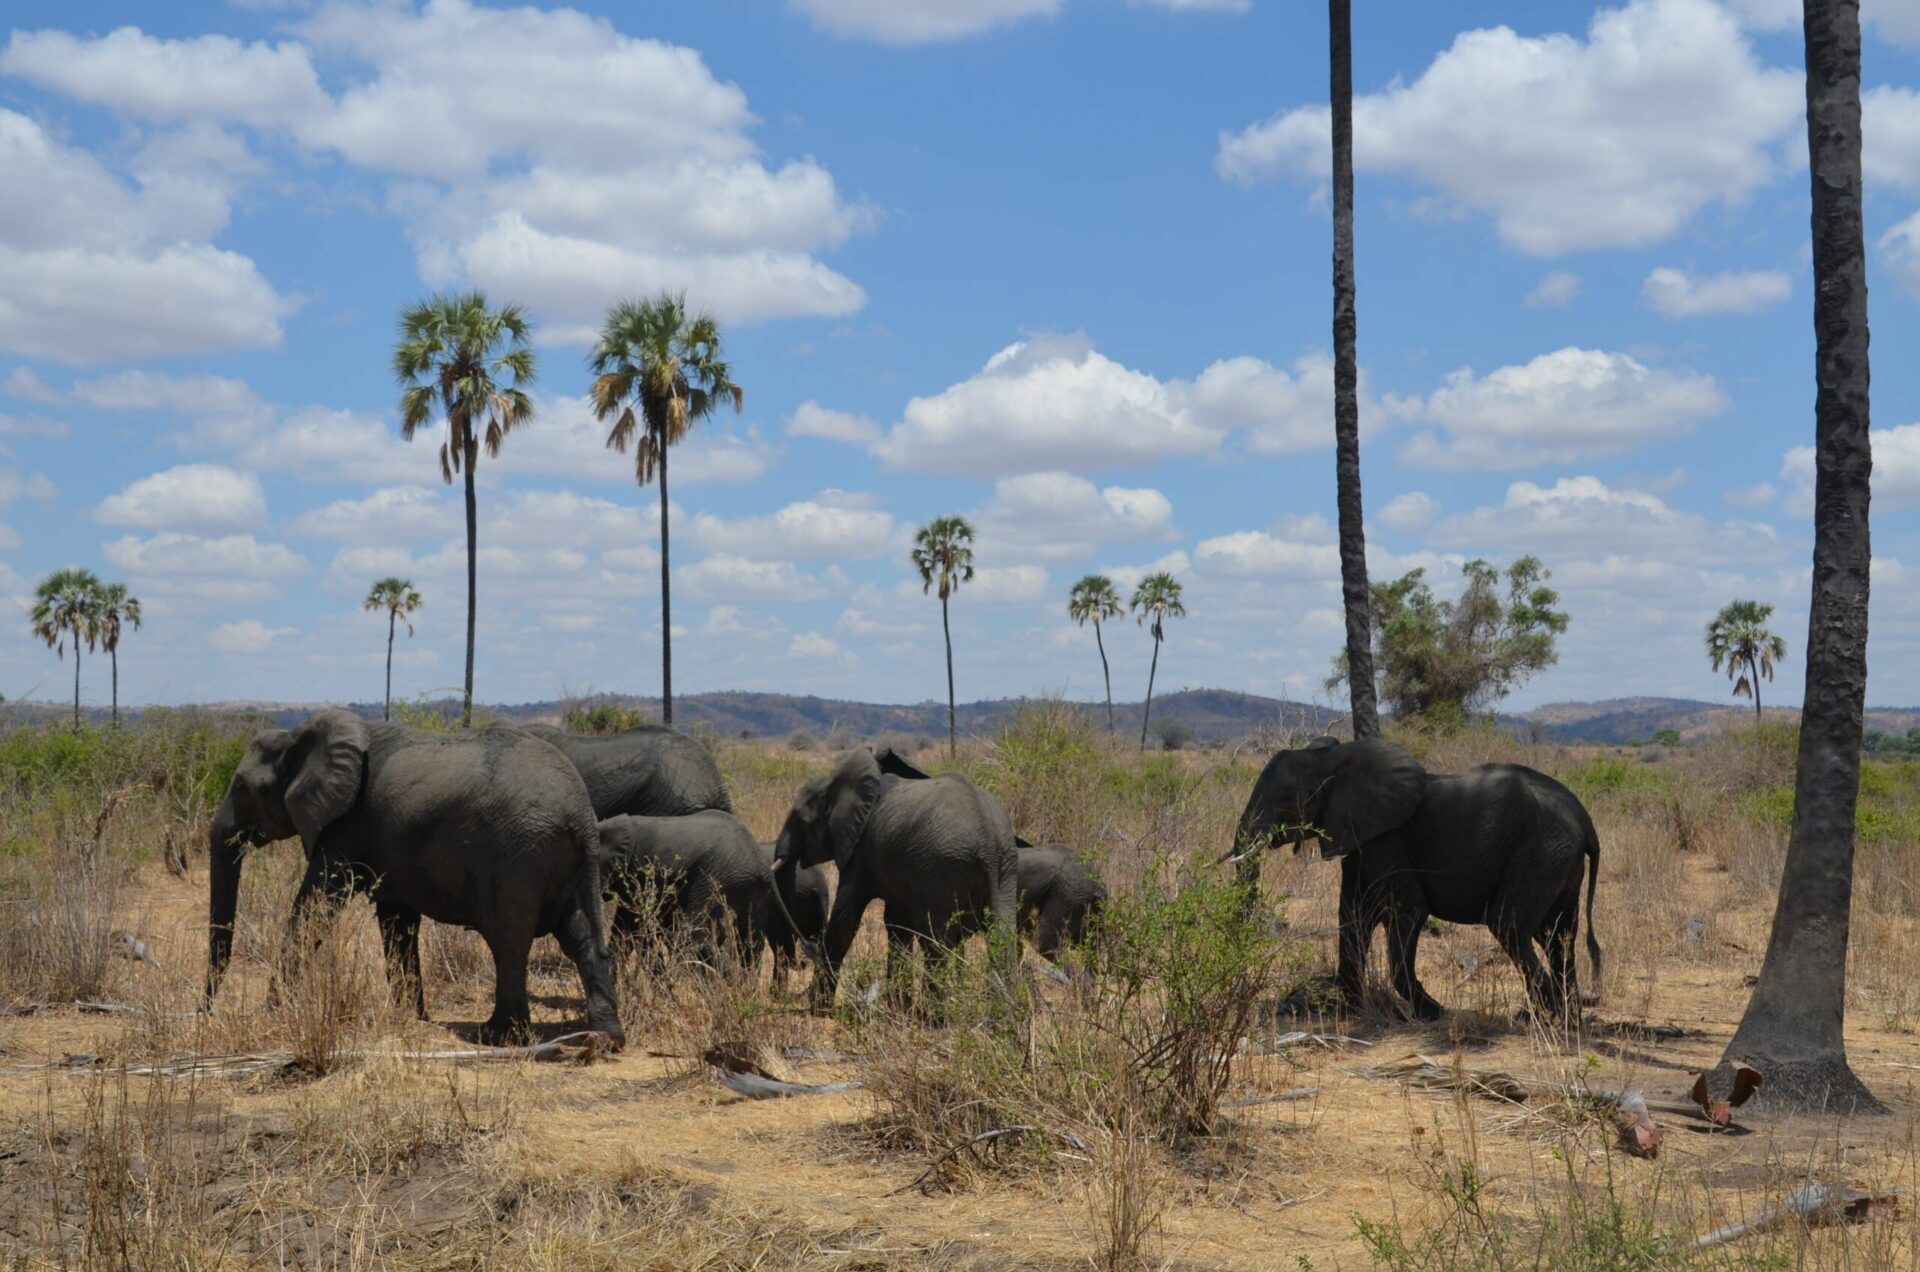 Family of seven elephants roams through open grasslands with scattered palm trees, blue skies, and clouds in Ruaha National Park